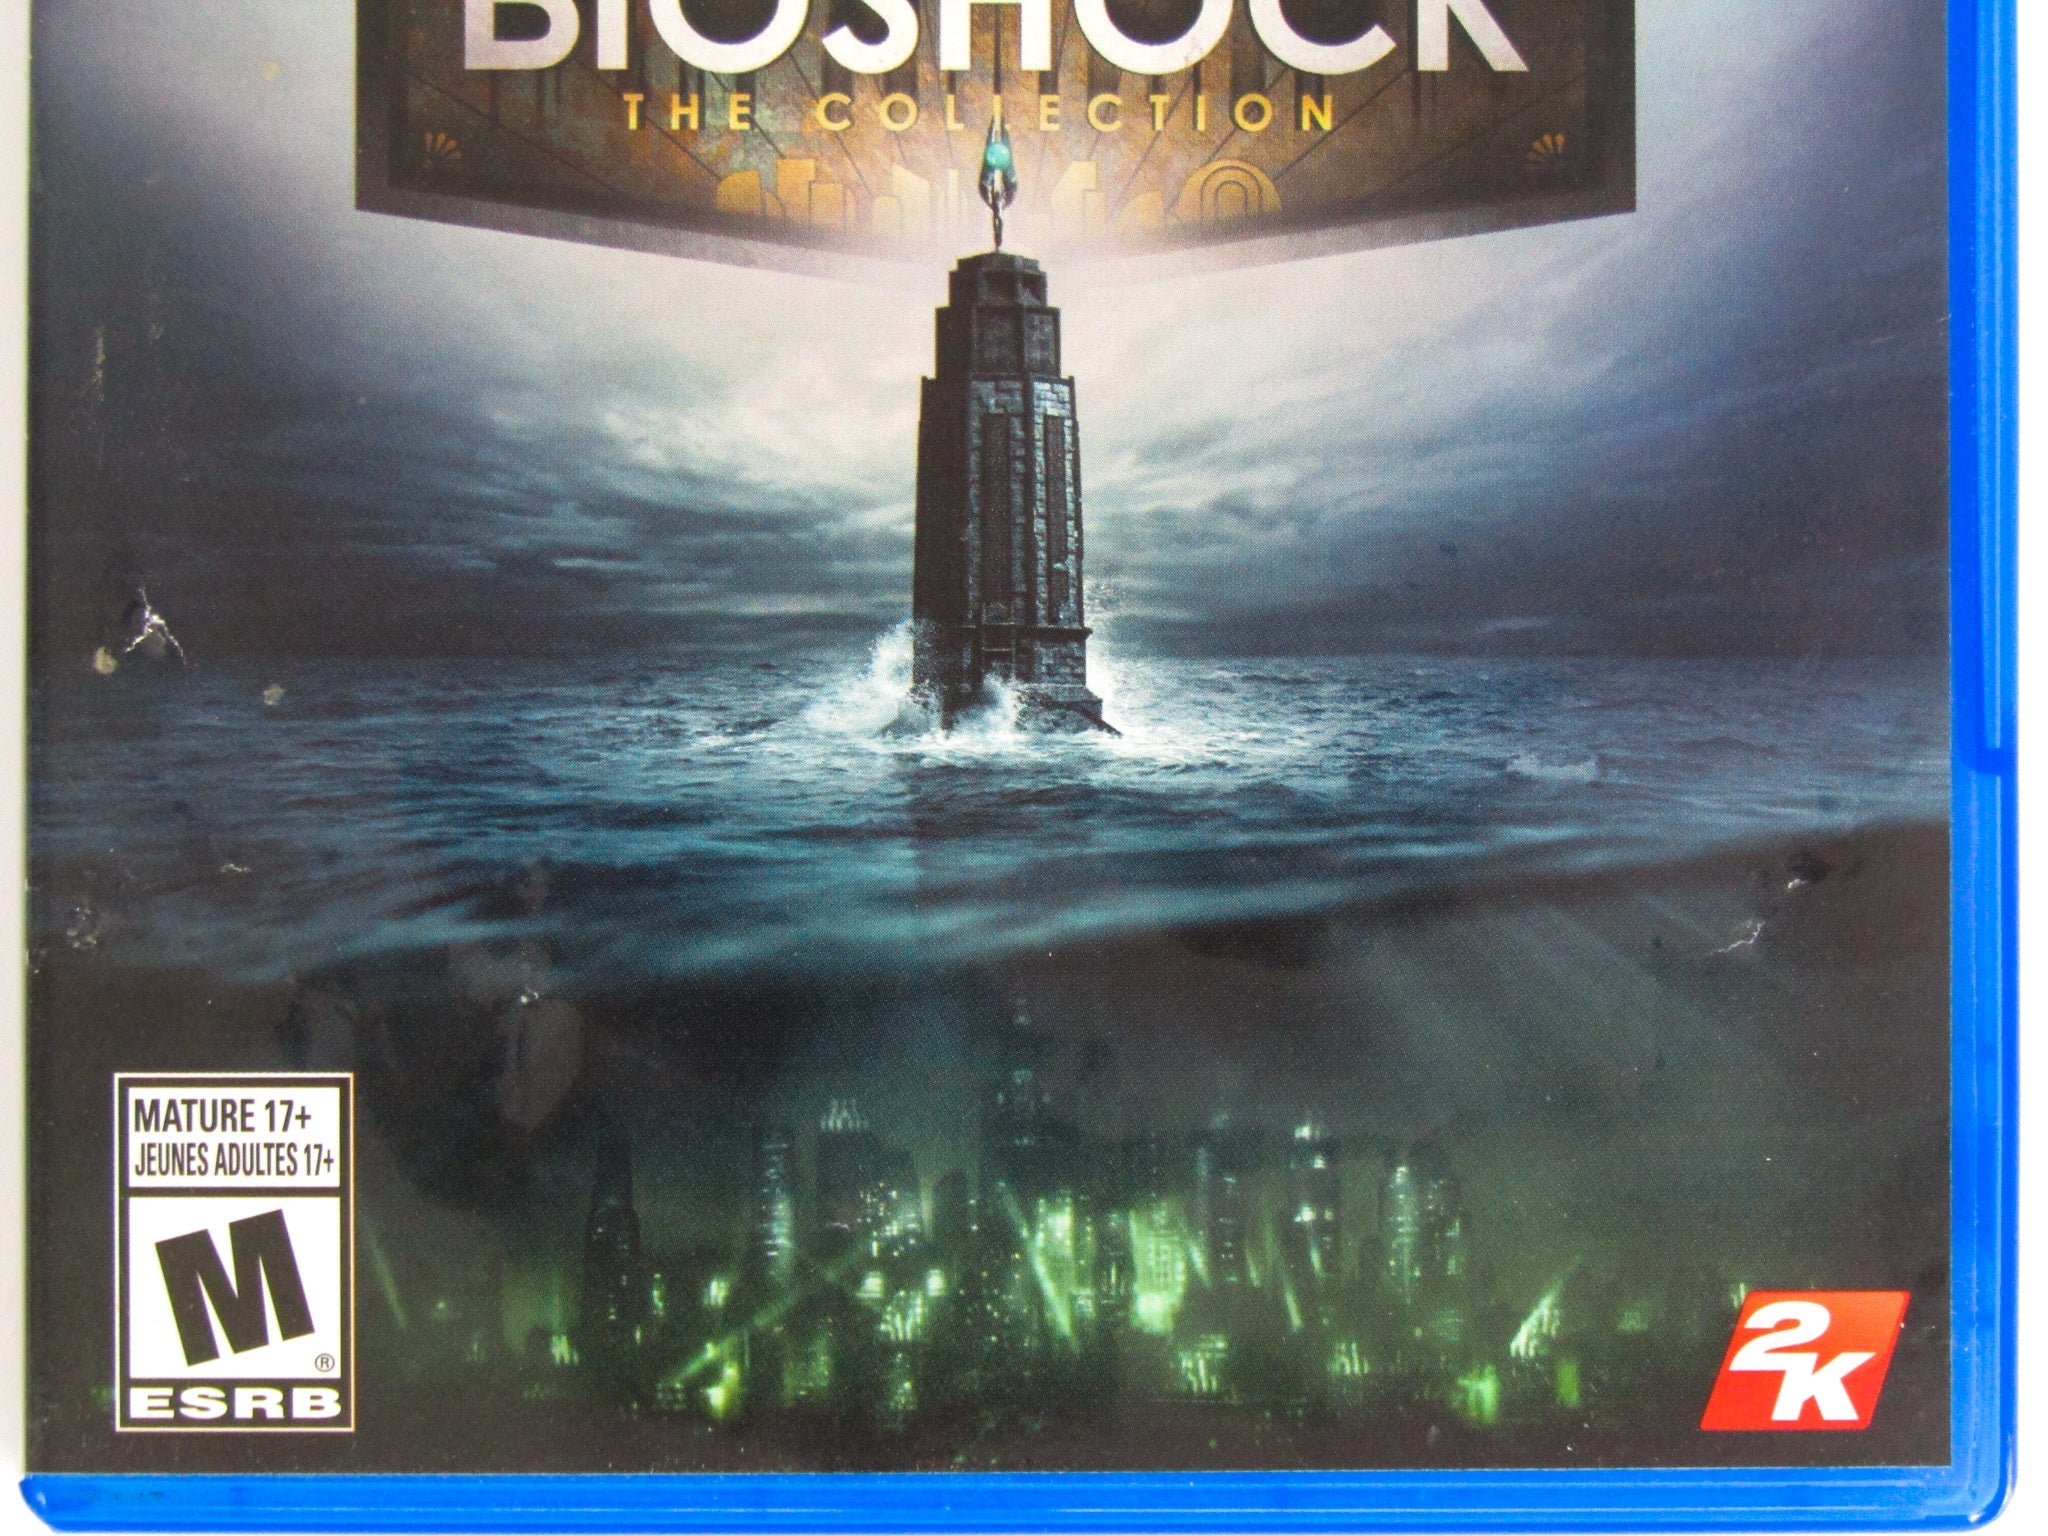 BIOSHOCK THE COLLECTION PS4 (US IMPORT) GAME for sale online